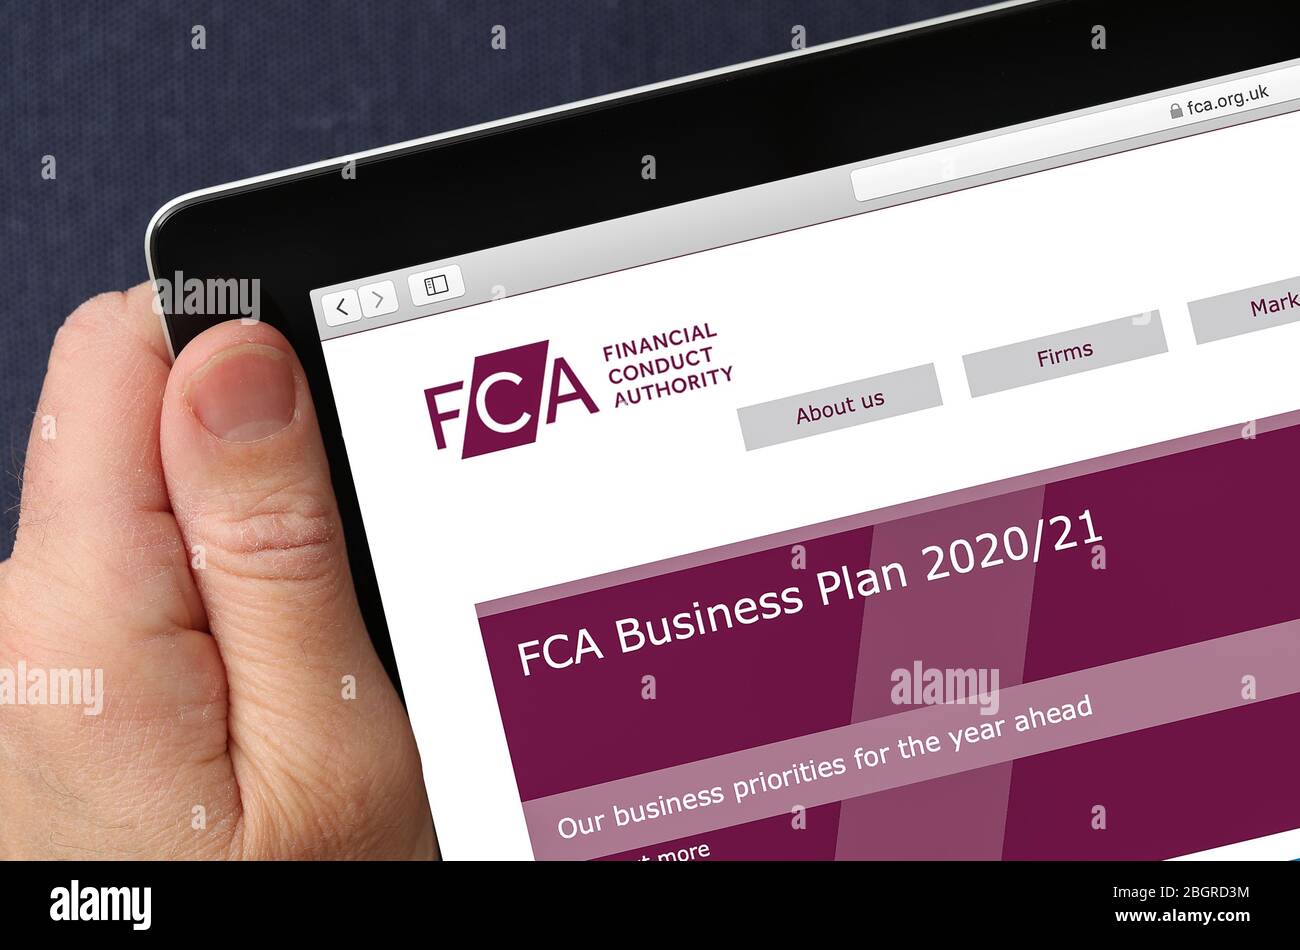 FCA Financial Conduct Authority website viewed on an iPad Stock Photo